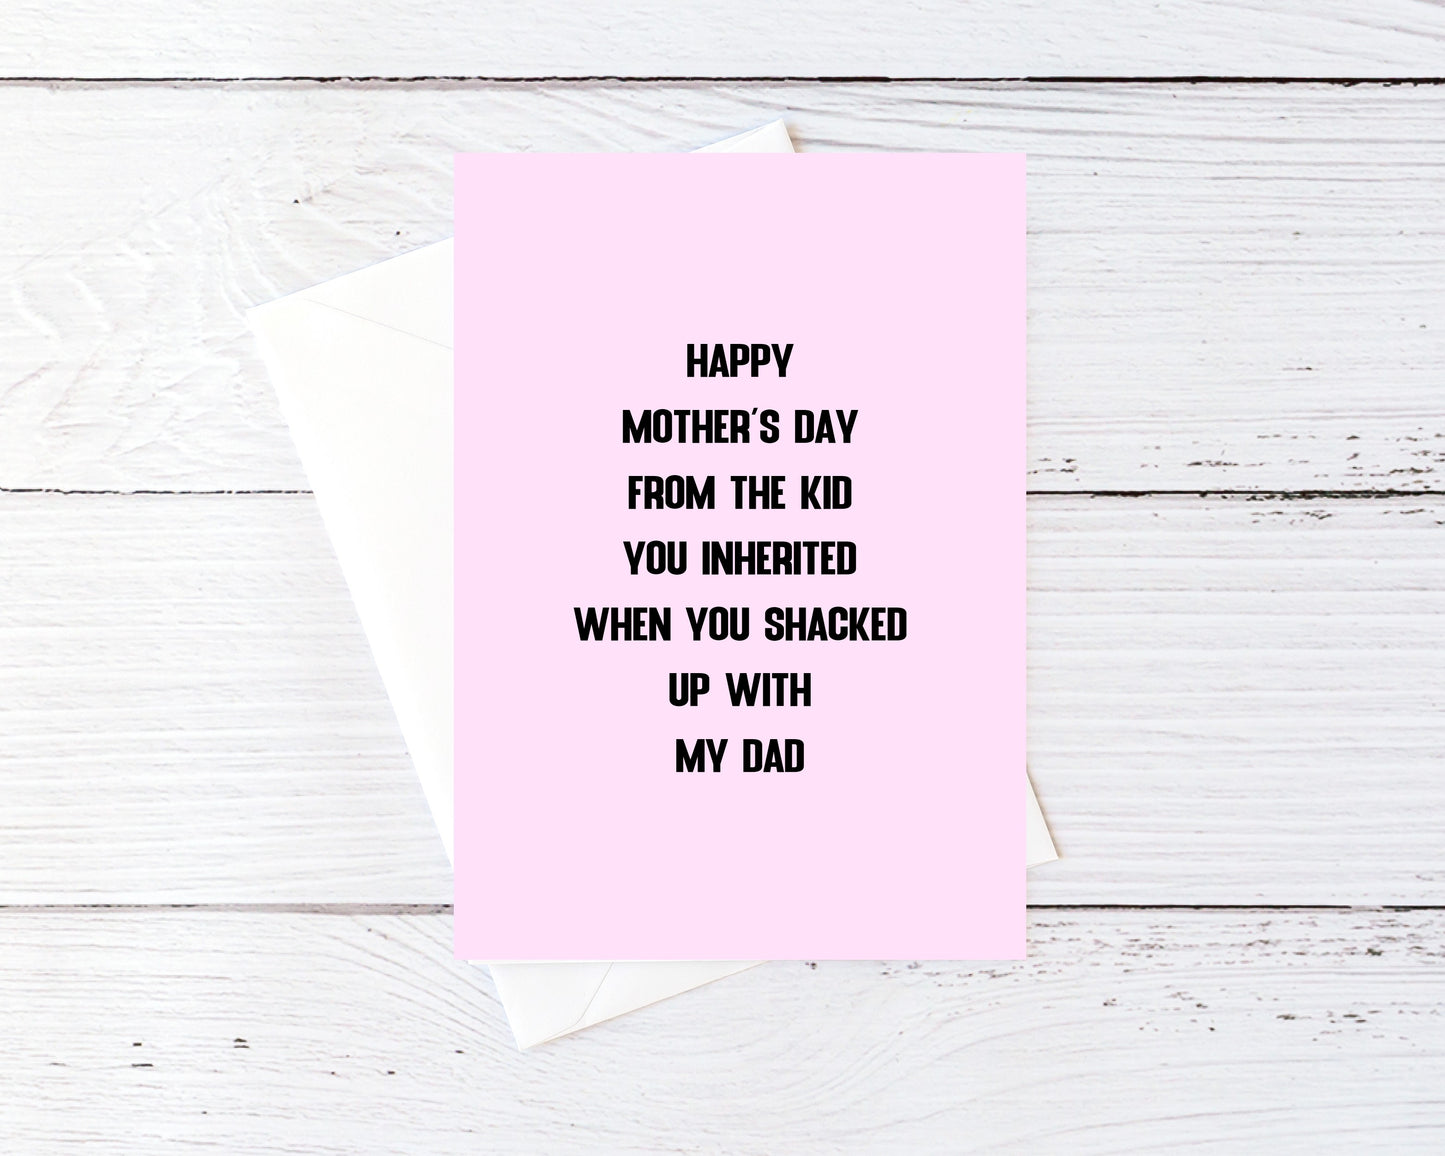 Mothers Day Card | From The Kid You Inherited When You Shacked Up With My Dad | Funny Mum Card | Joke Mum Card